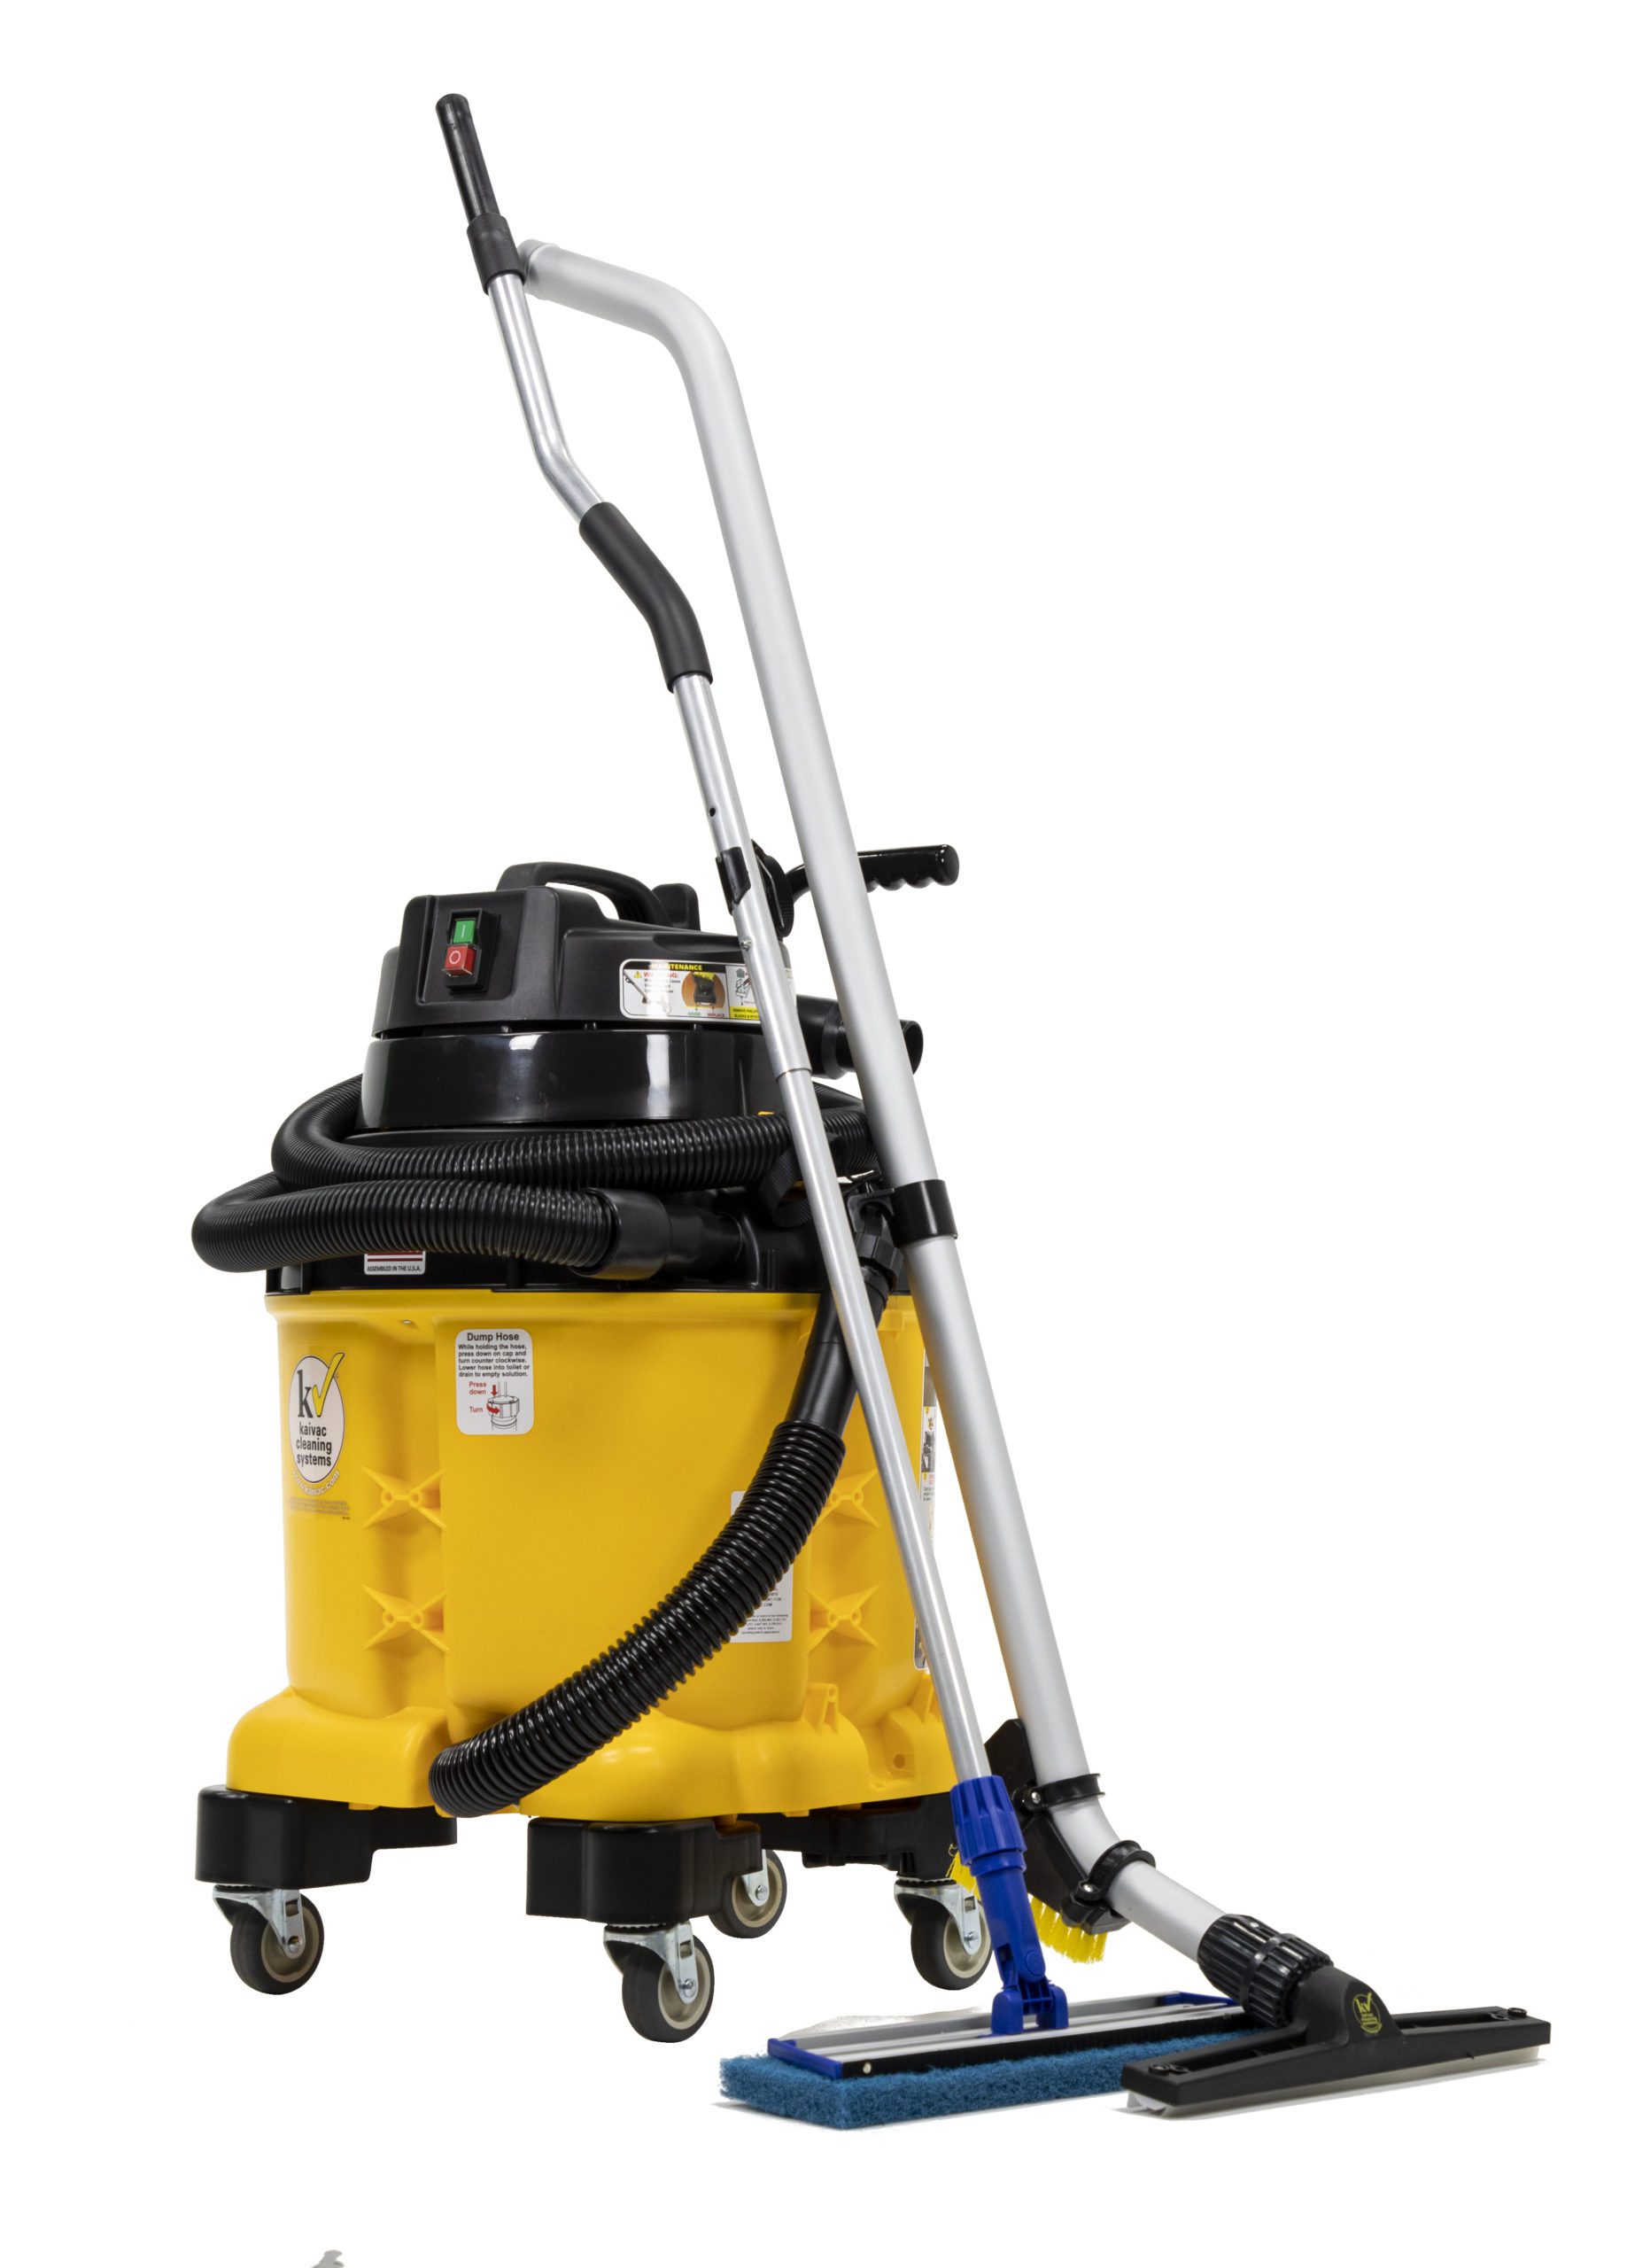 UniVac - Compact Floor Cleaning Machine Cleans Better Than a Mop